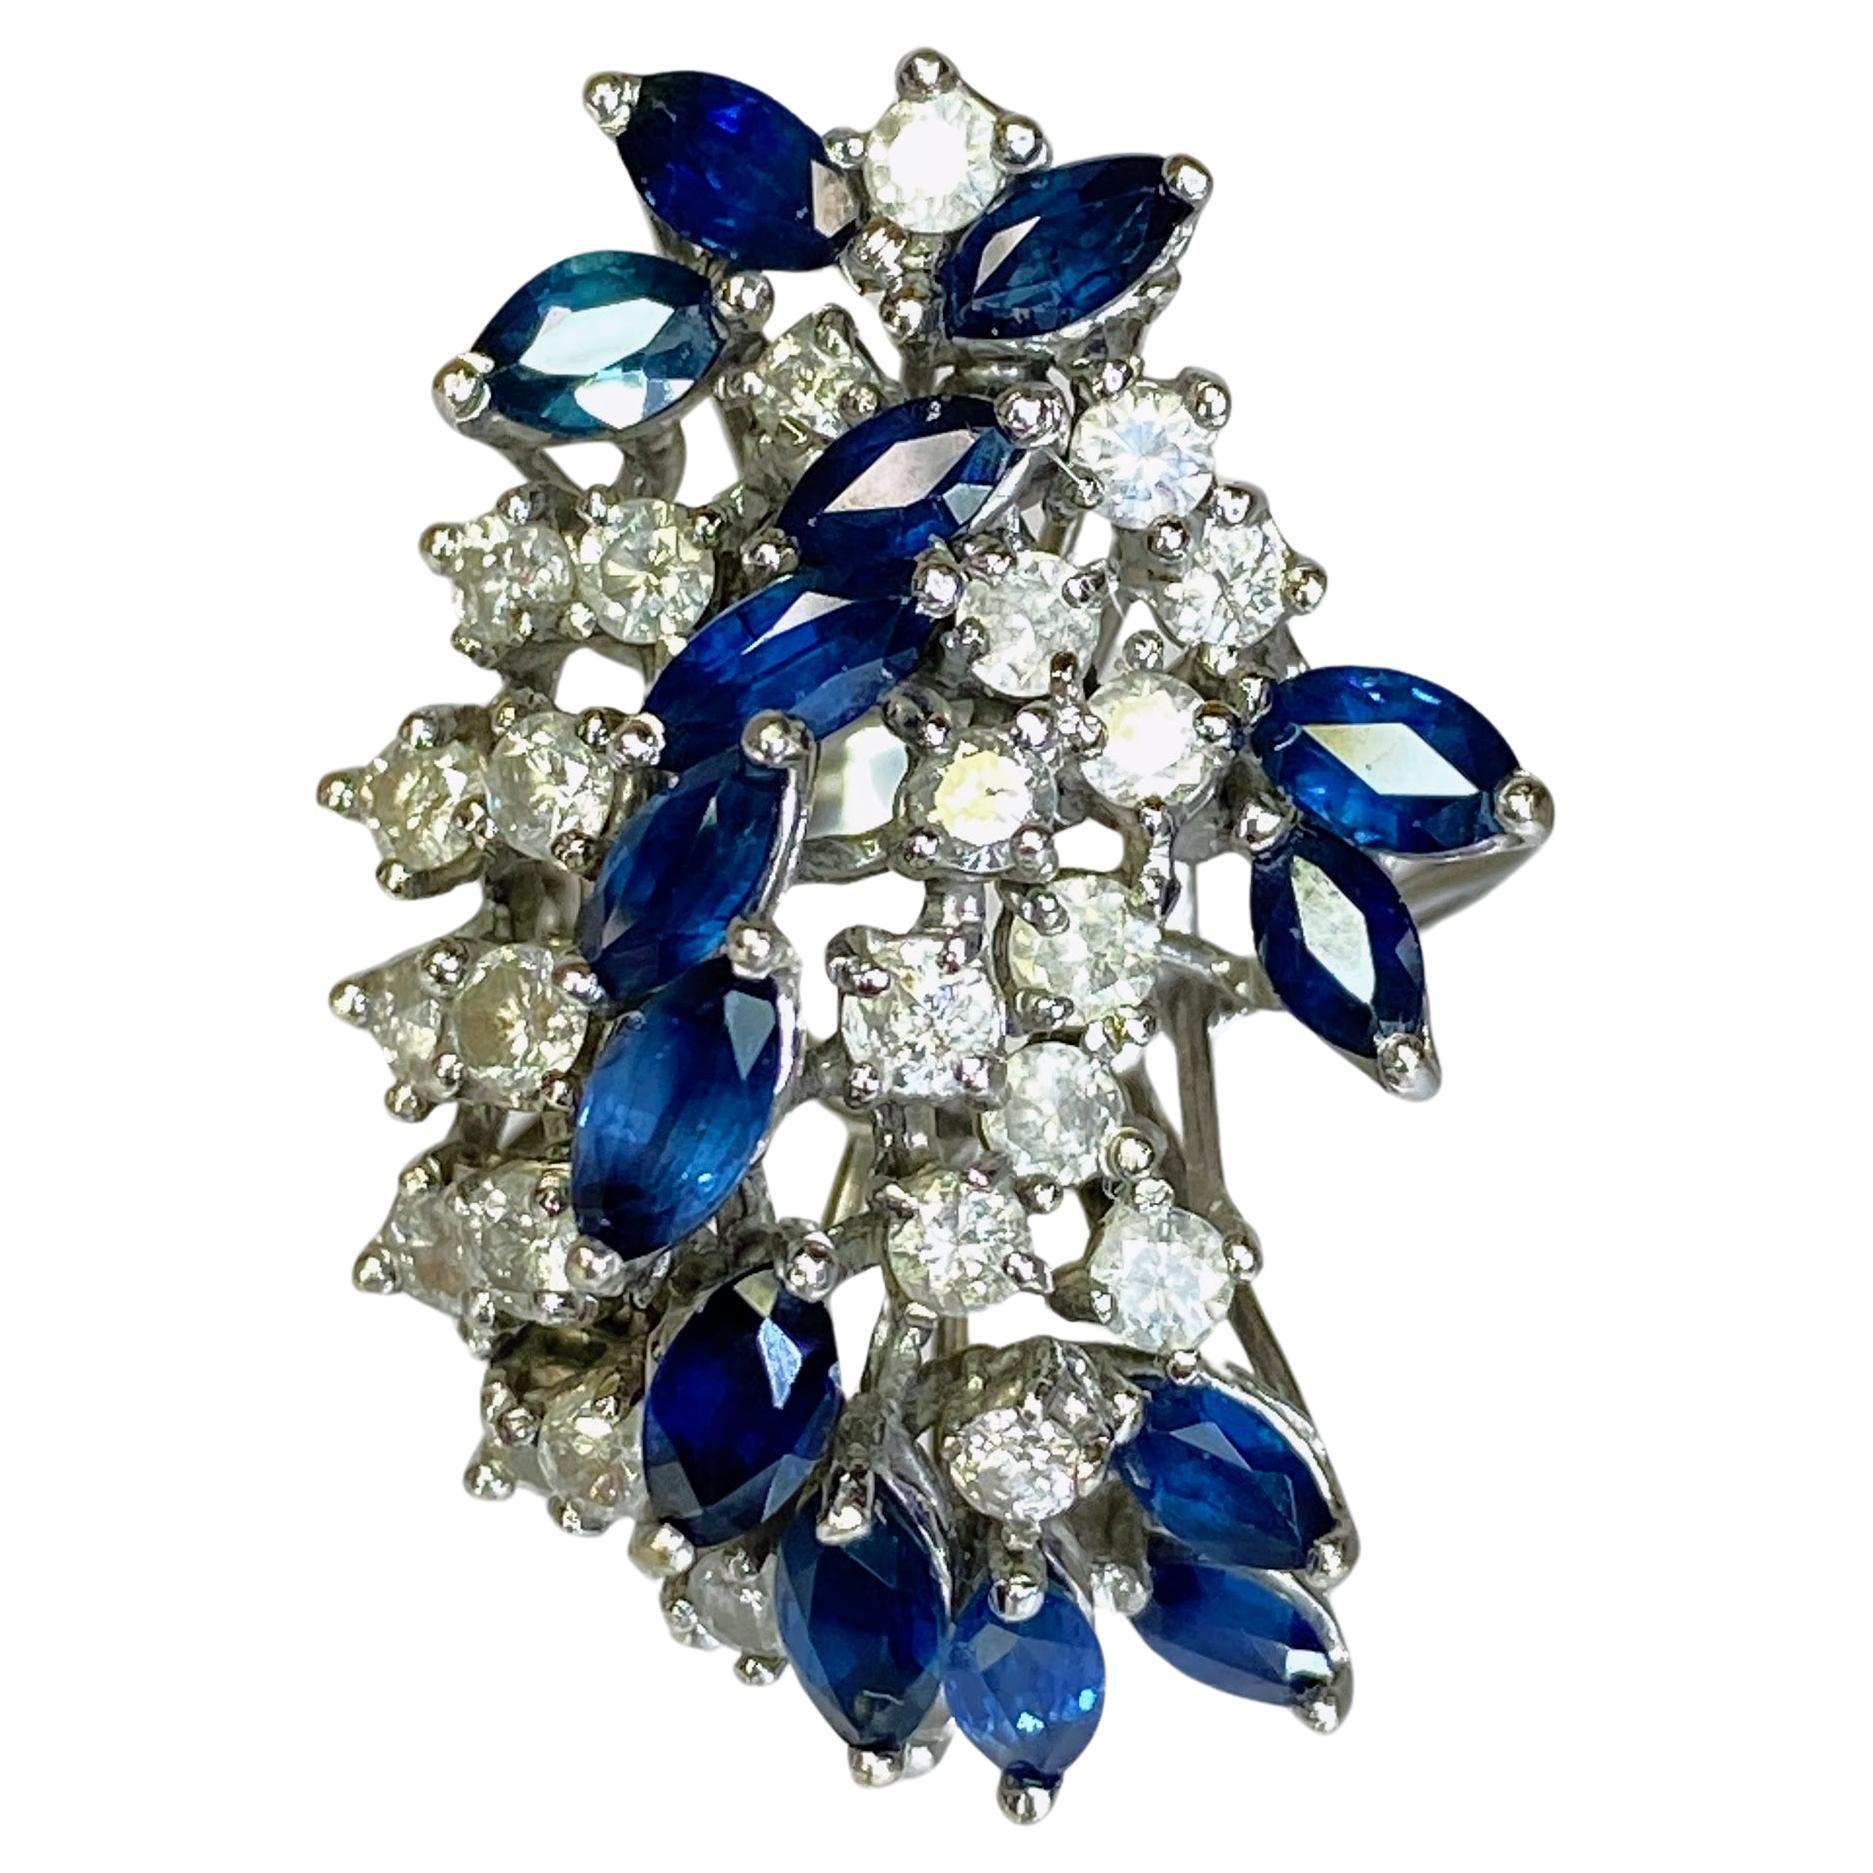 14K White Gold Diamond & Blue Sapphire 4.5 Carat Waterfall Cluster Ring Size 7.5 For Sale